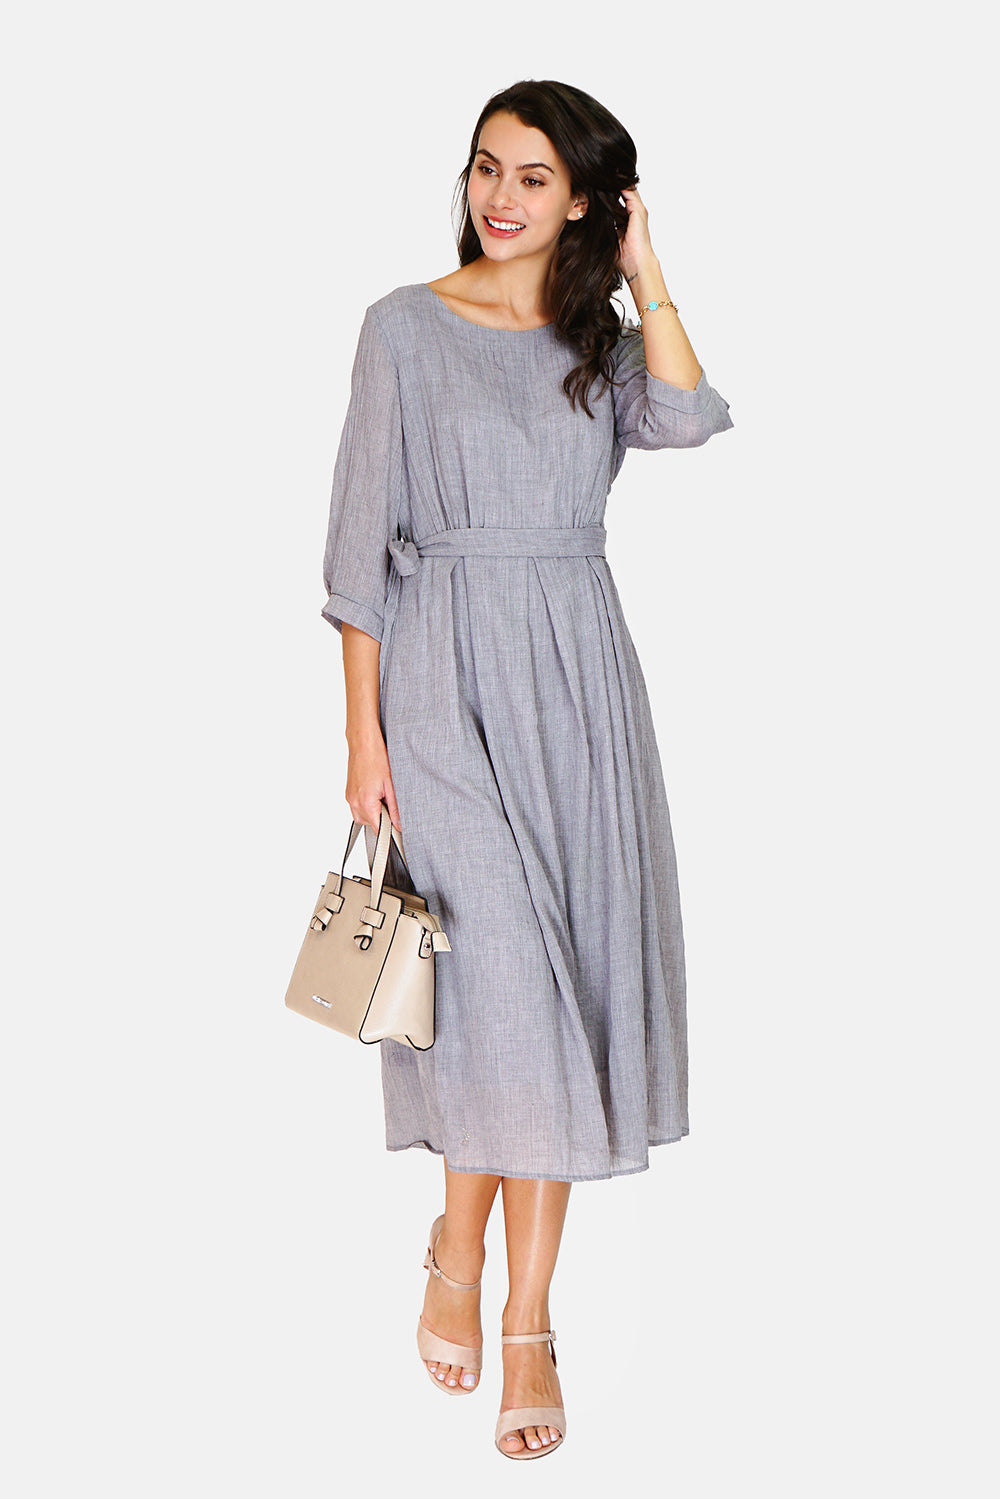 Long dress folded at the waist with belt with 3/4 sleeves